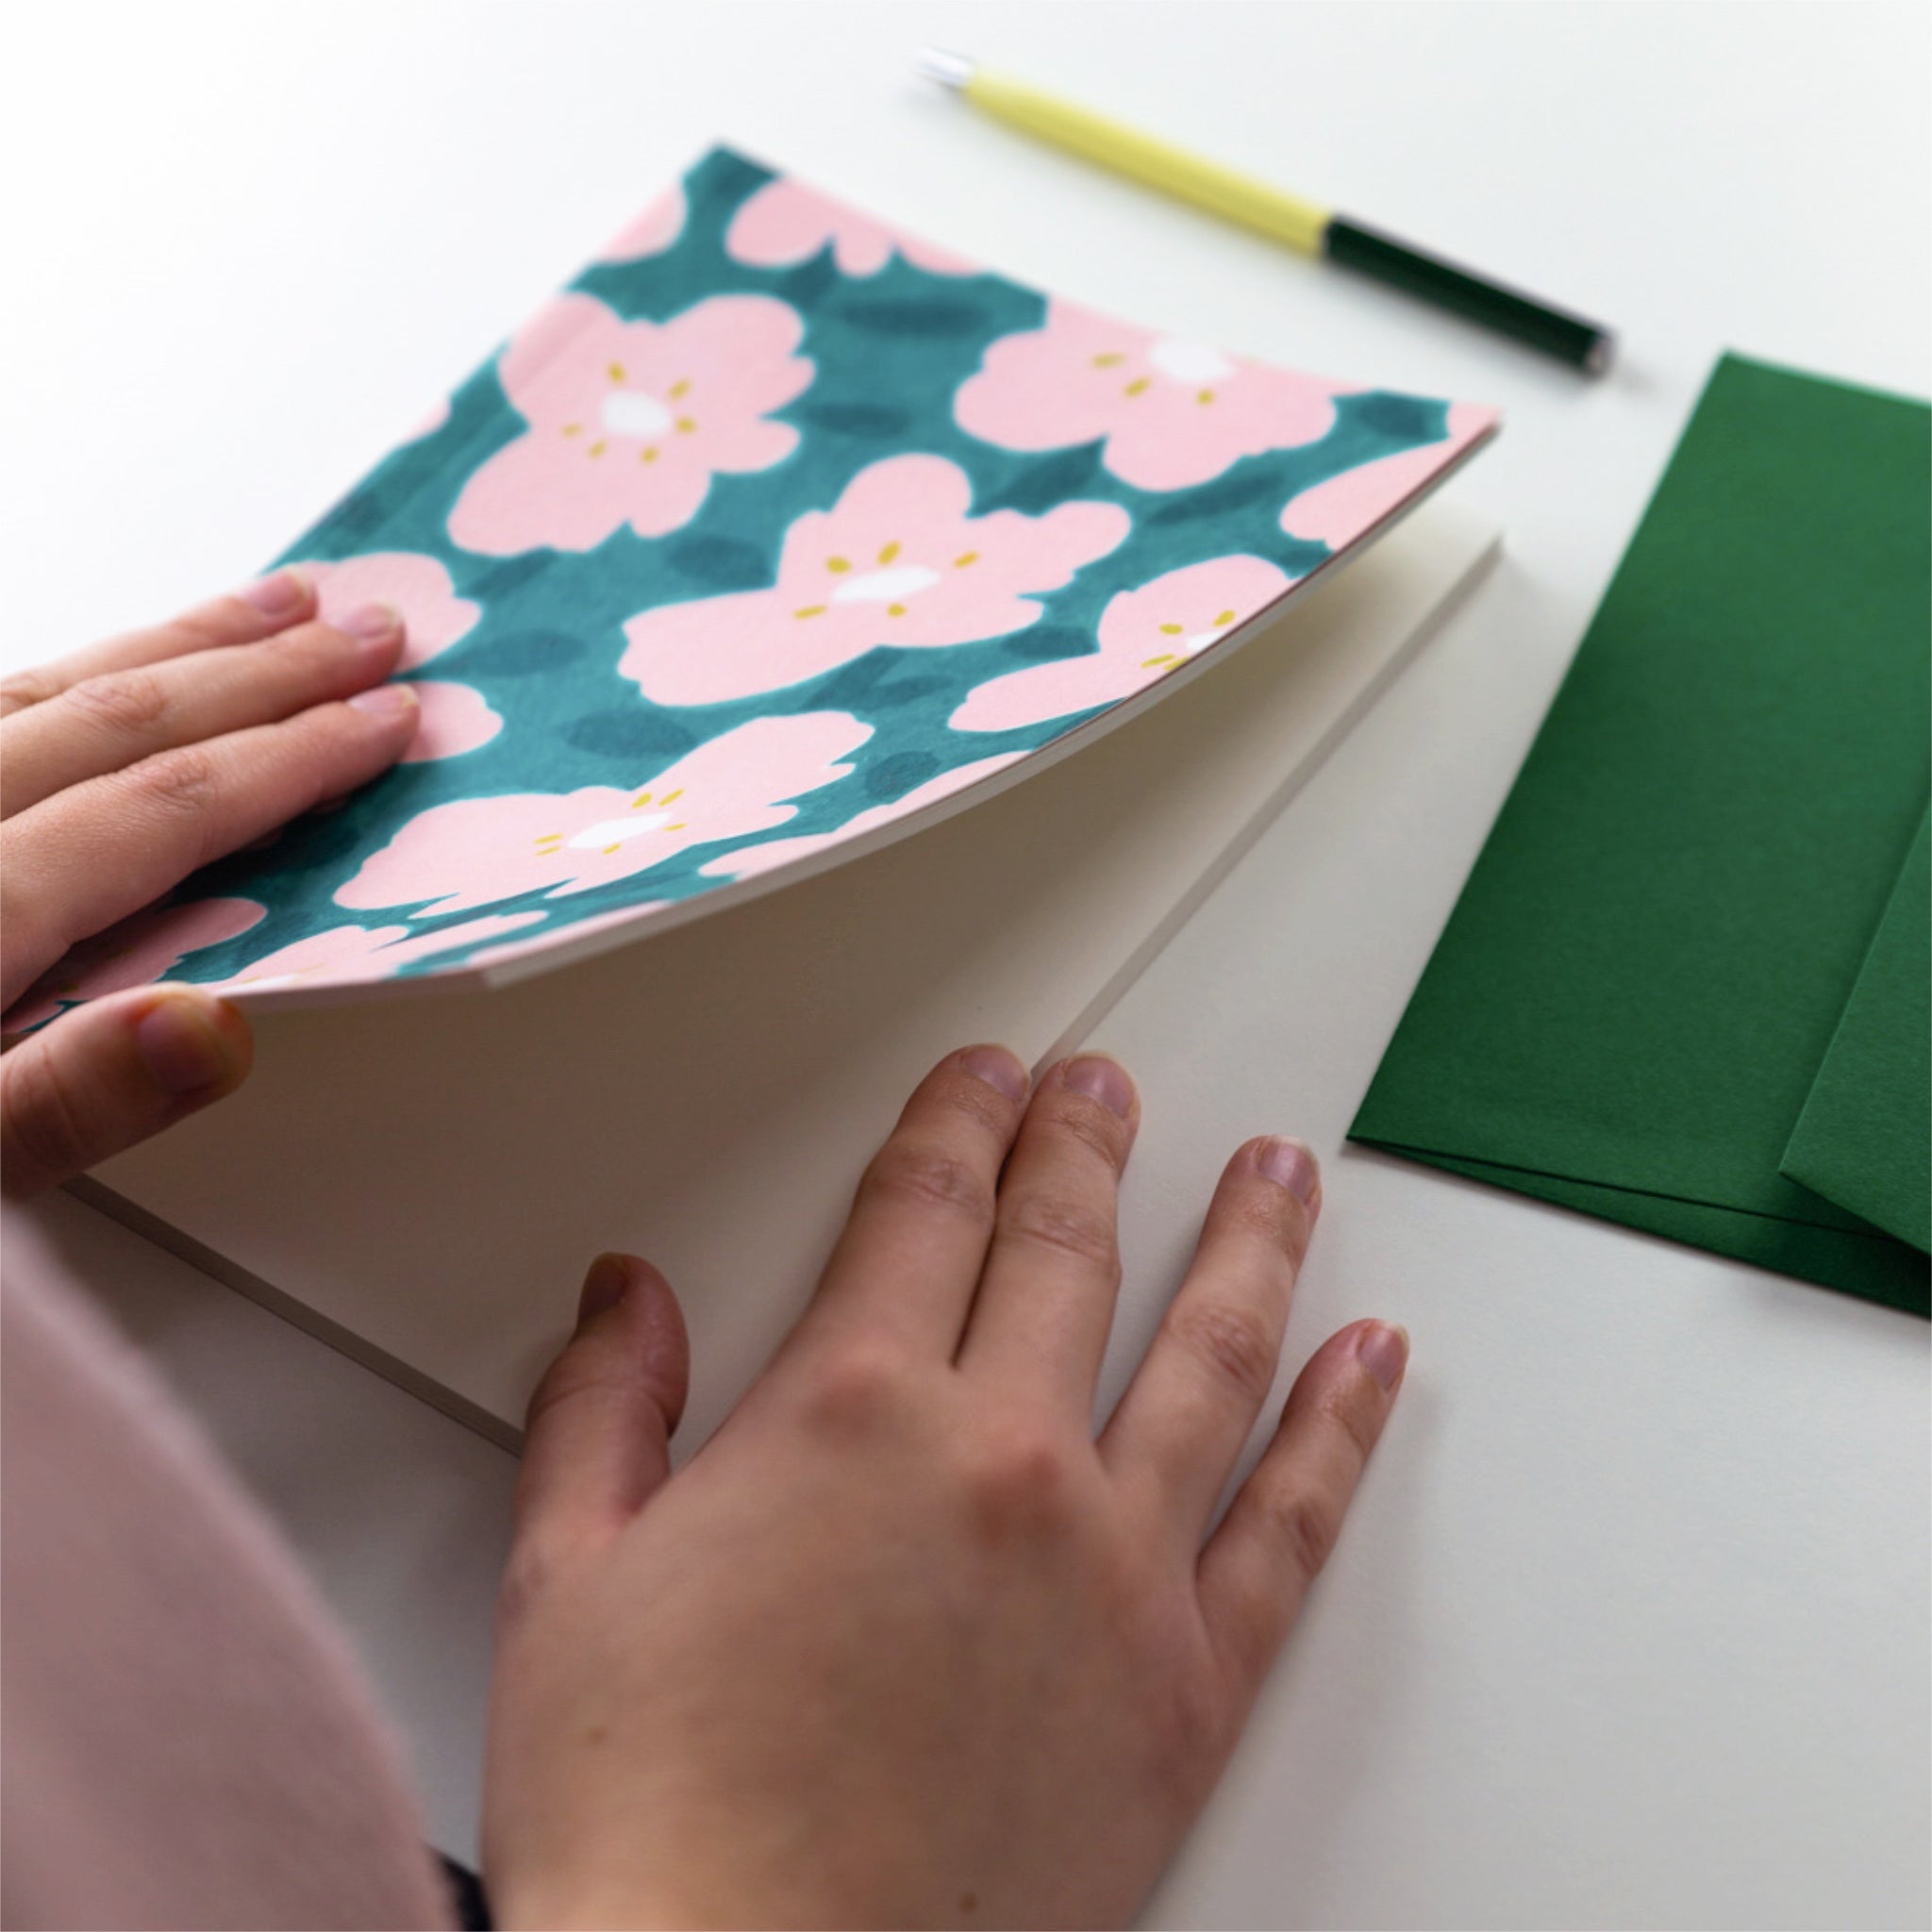 A5 softcover sketchbook with pink and green flowers